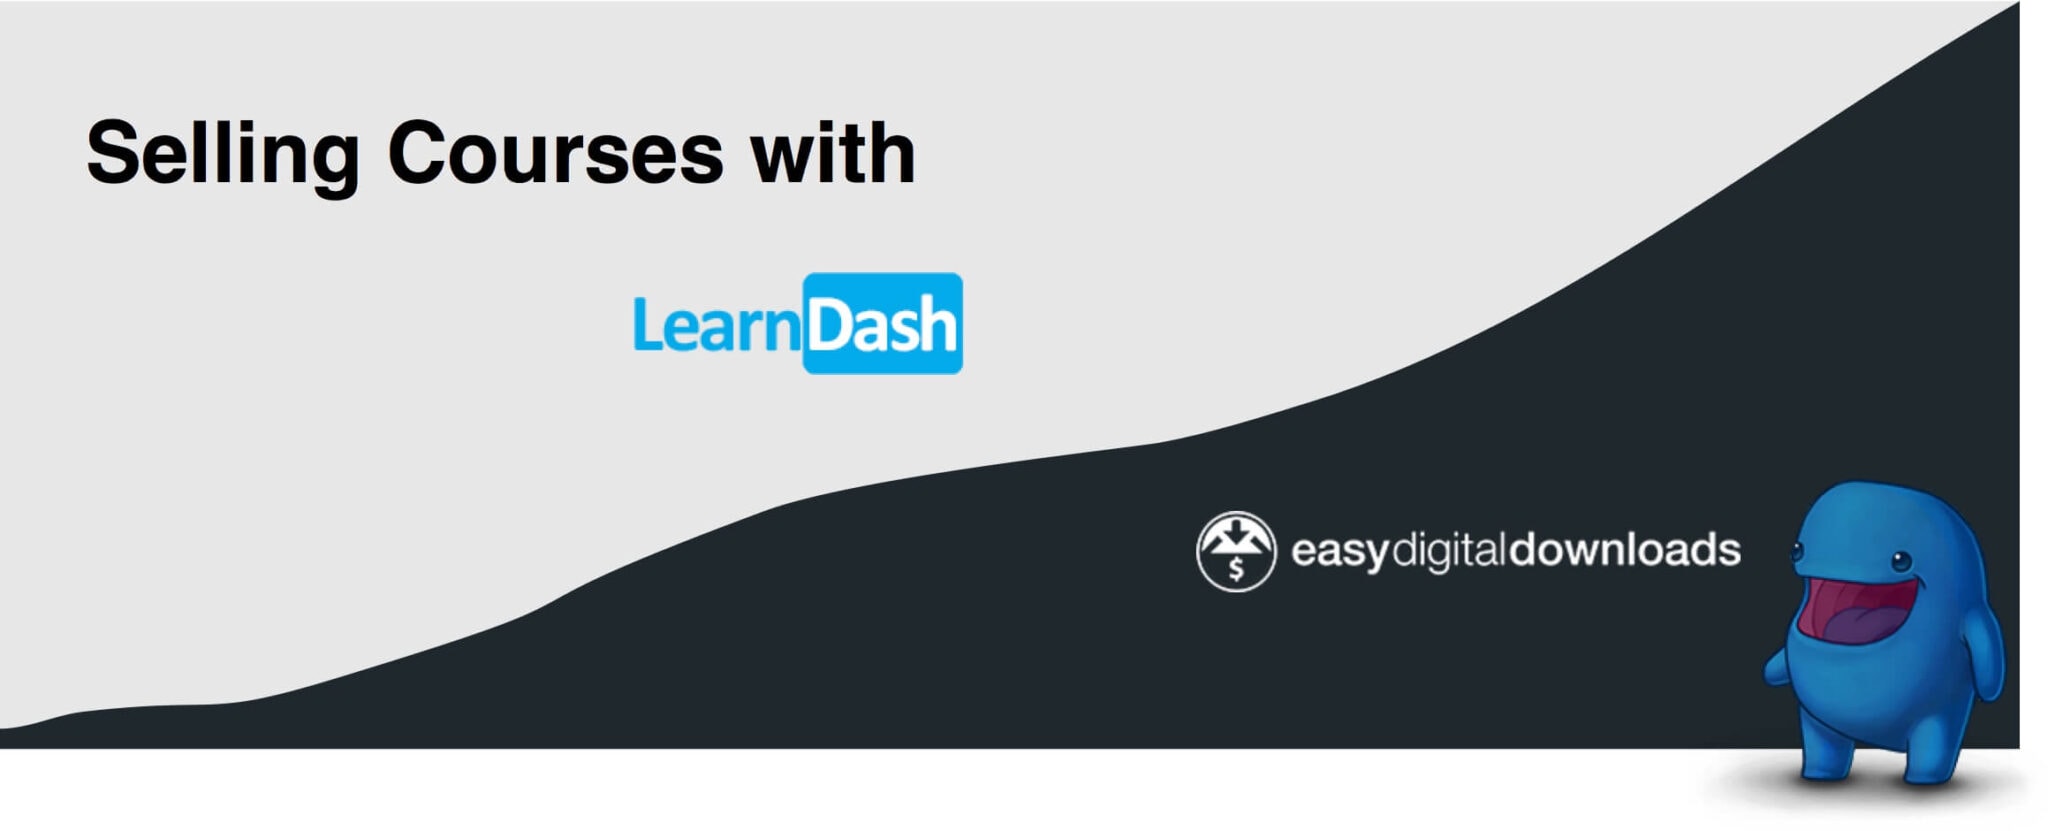 Creating A Course With Learndash And Easy Digital Downloads Digisavvy 2735